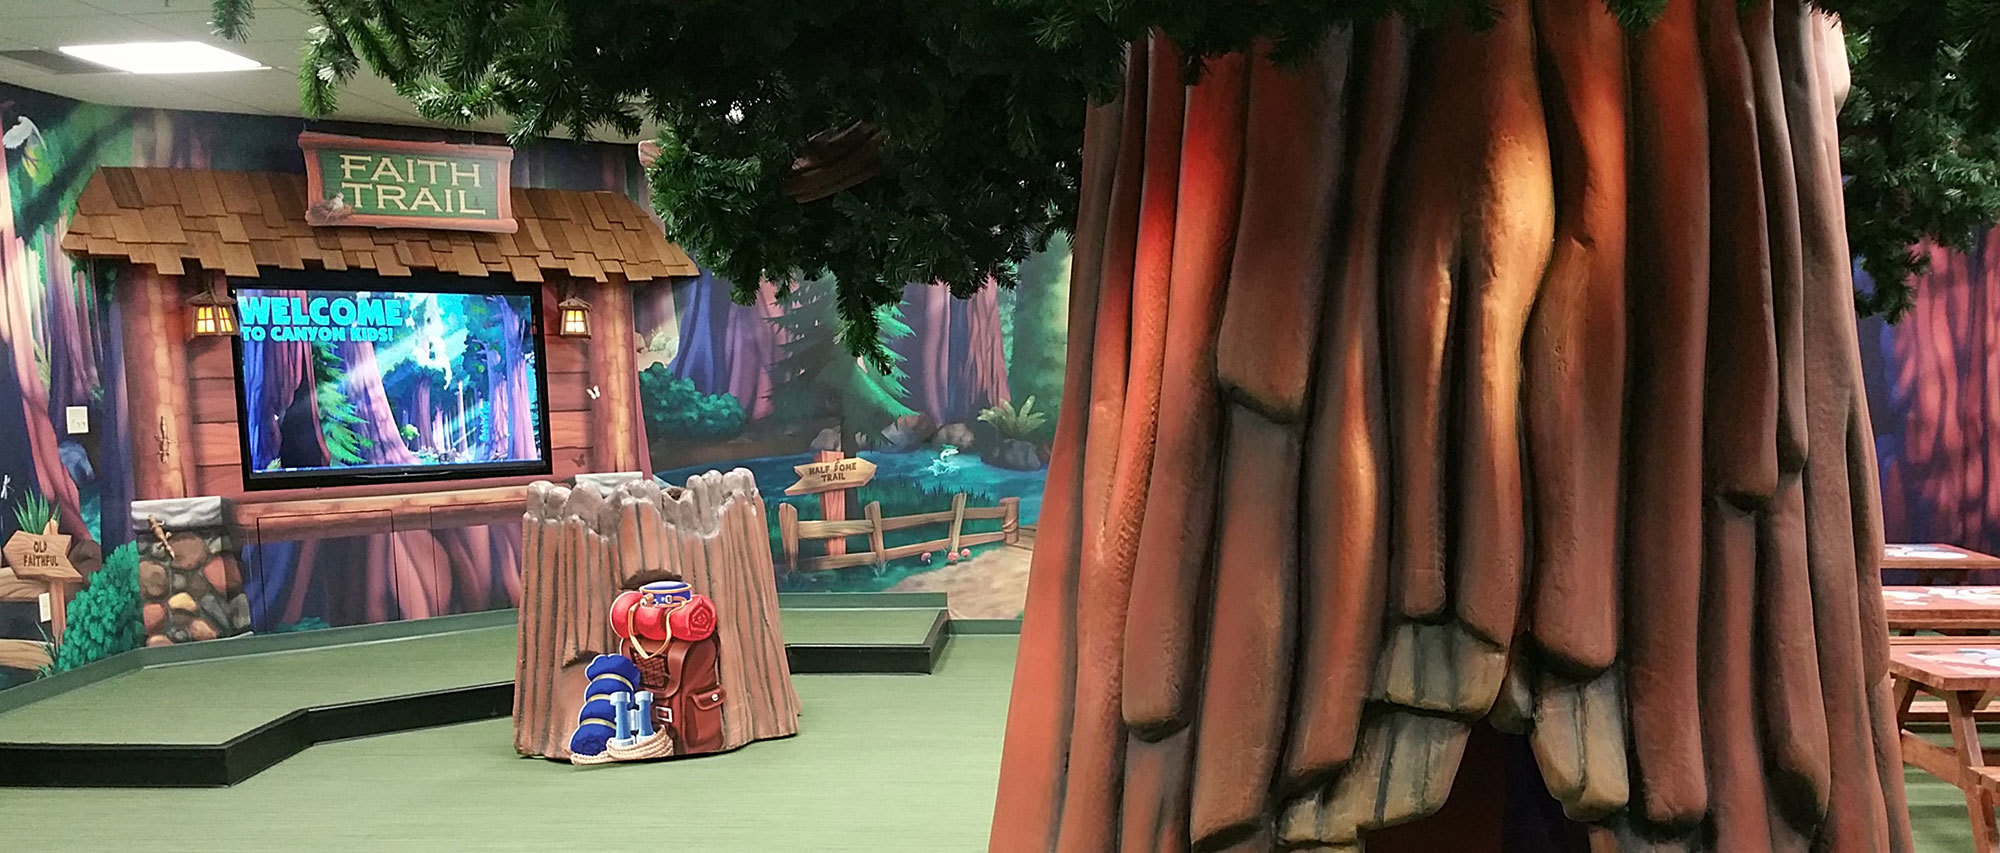 3D sculpted tree, lodge facade and forest murals in a Camping Themed Space at Faith Family Church